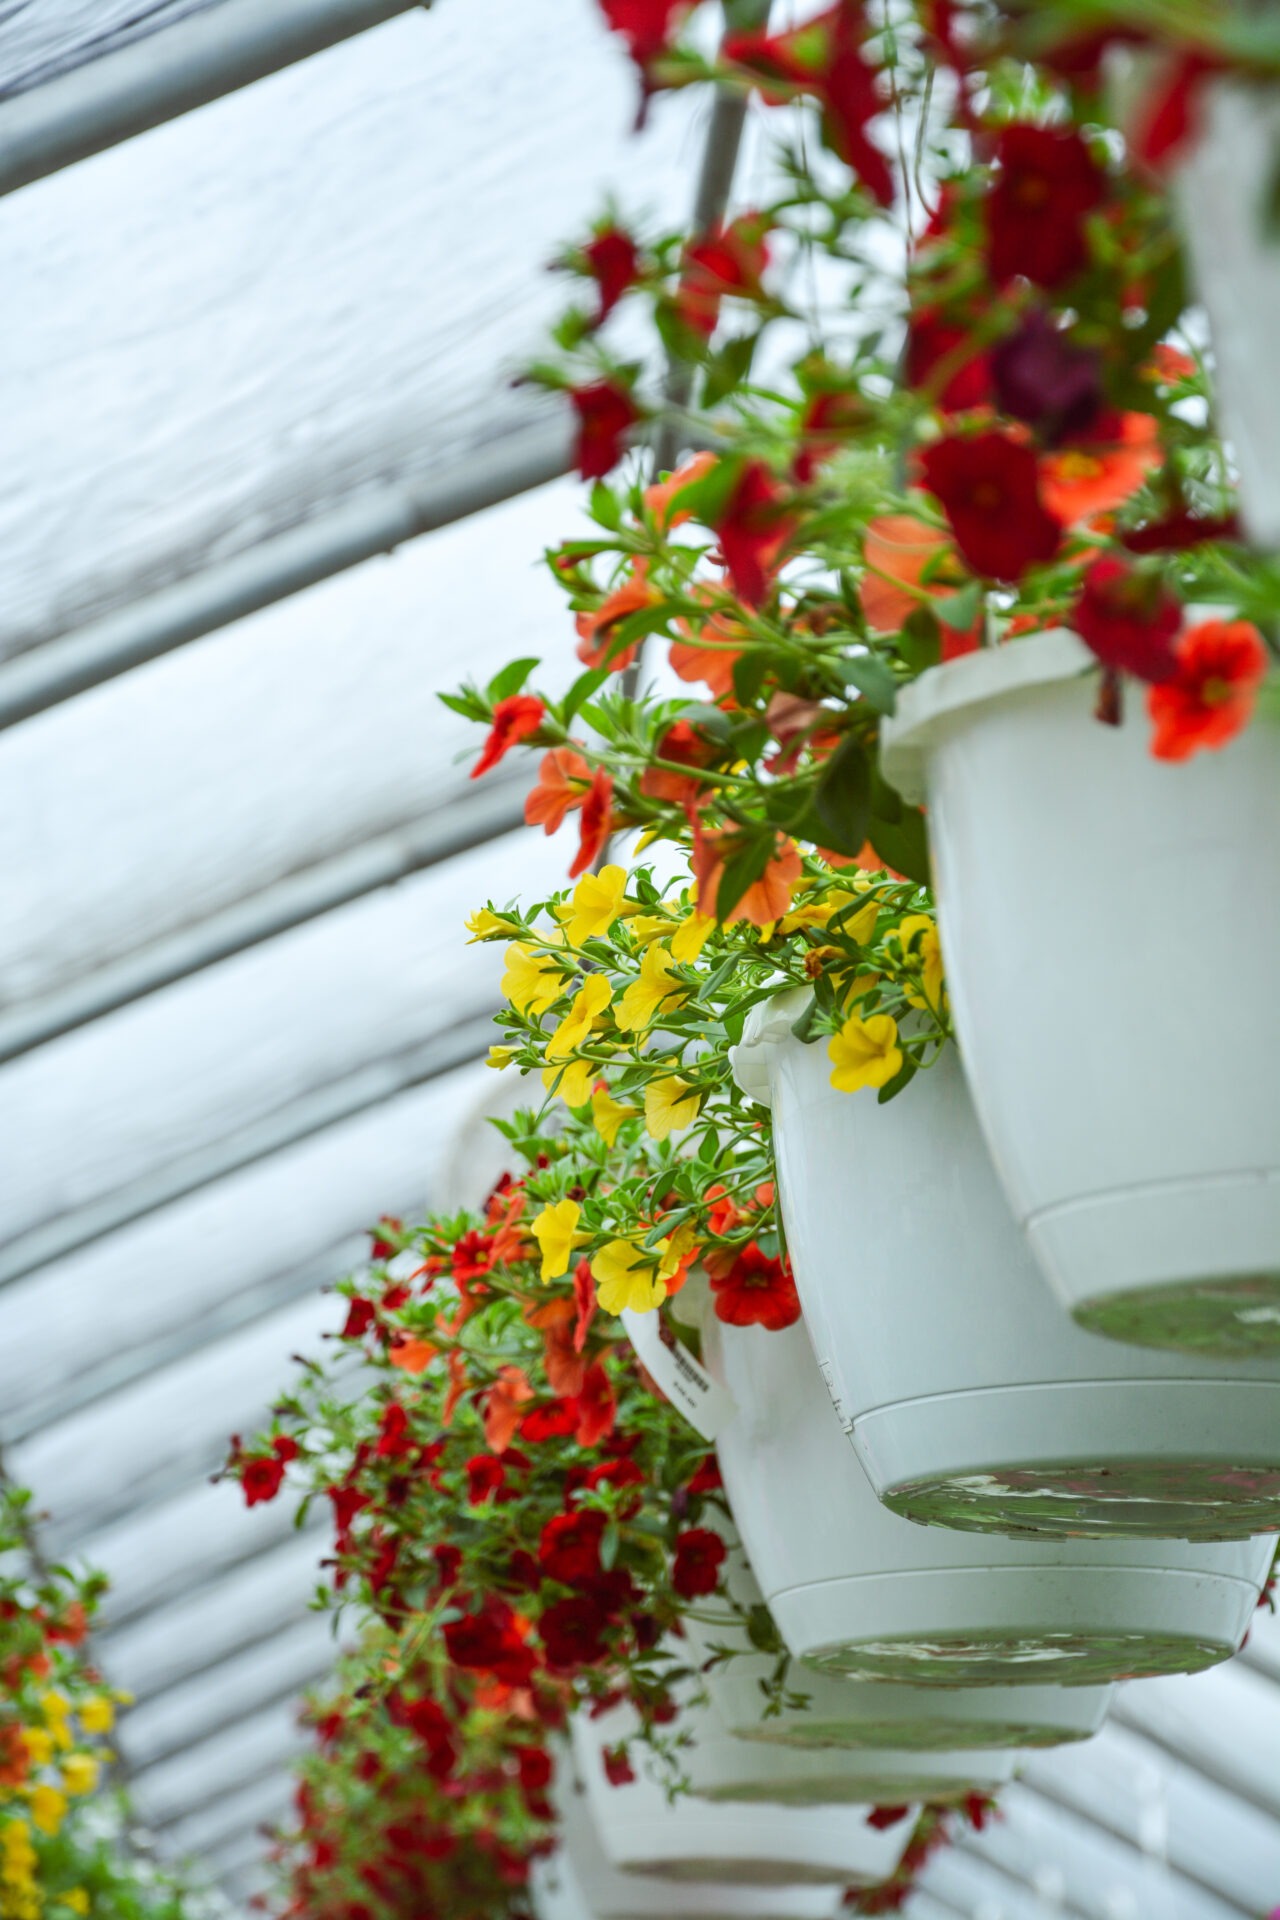 A series of white hanging flower pots adorned with red, orange, and yellow blooms arranged in a greenhouse with slanted translucent roofing panels above.